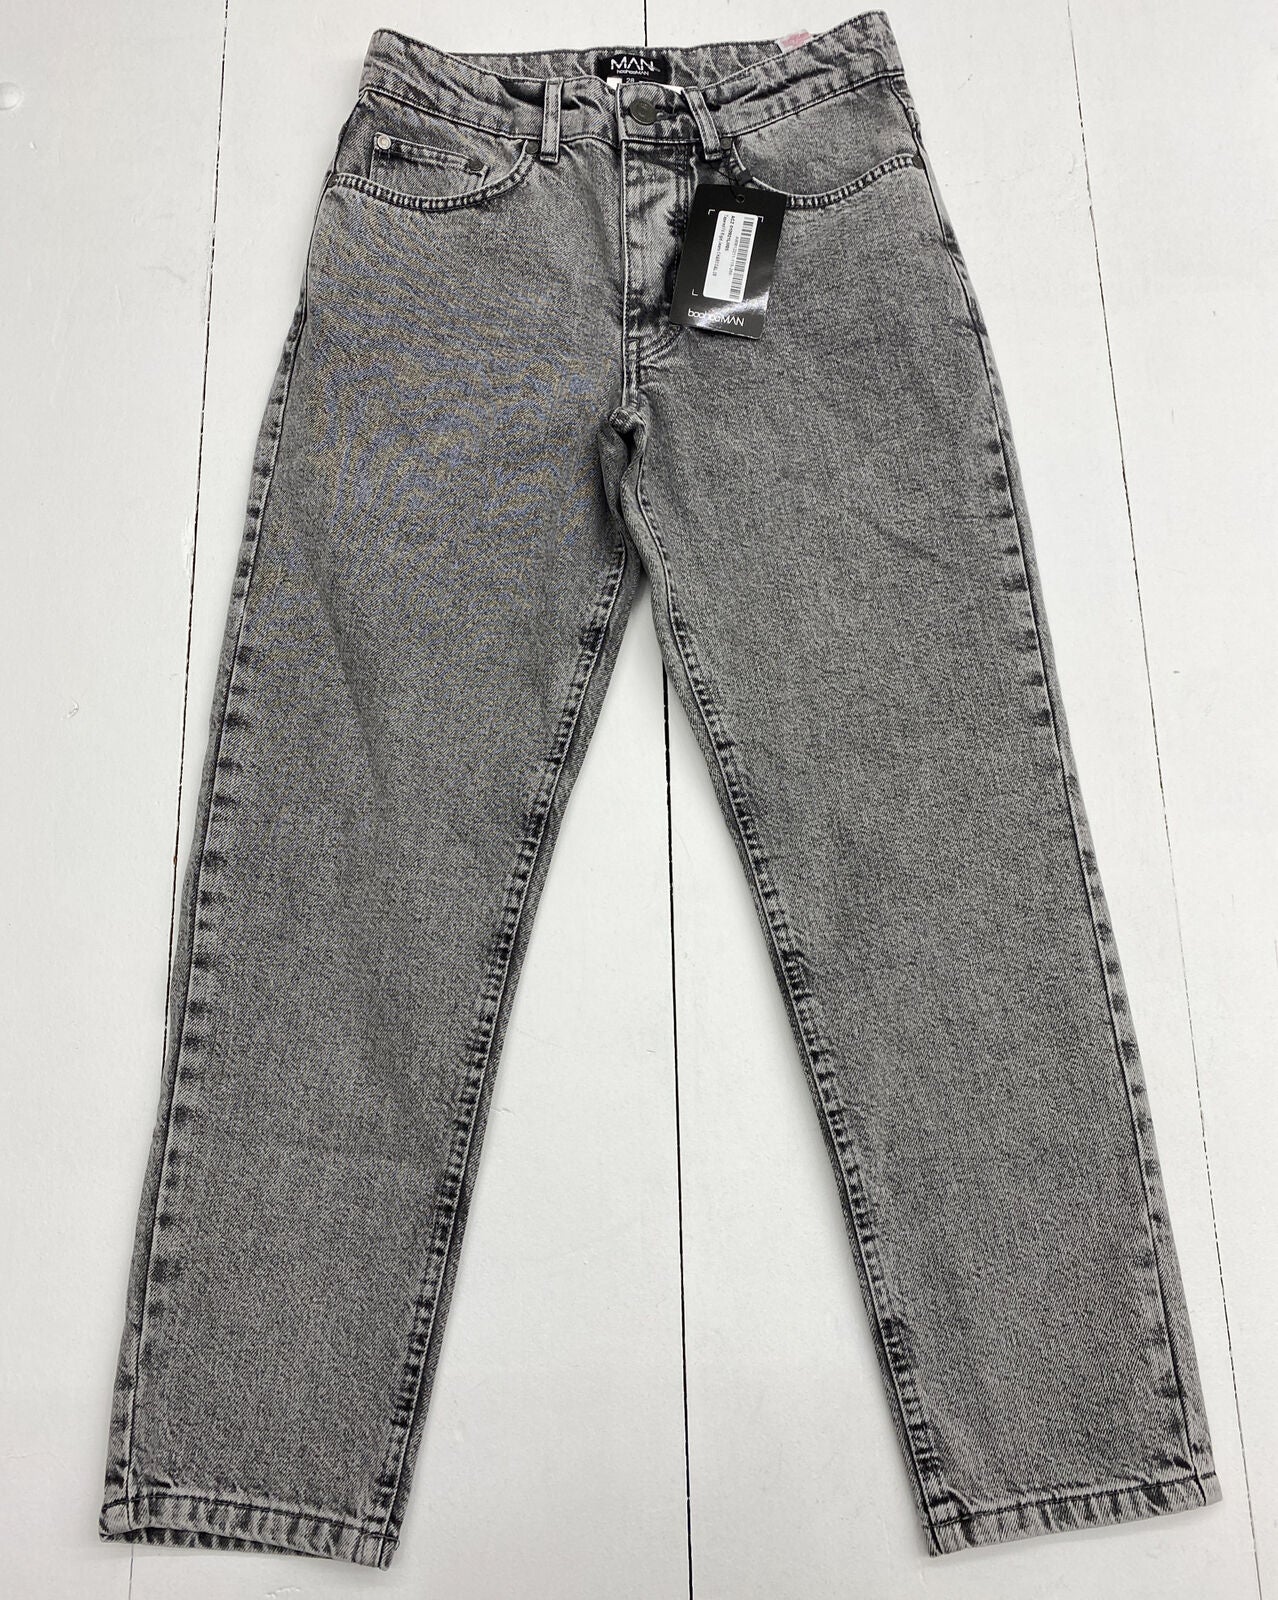 MAN boohooMAN Tapered Fit Rigid Jeans Charcoal Men's Size 28 - beyond  exchange